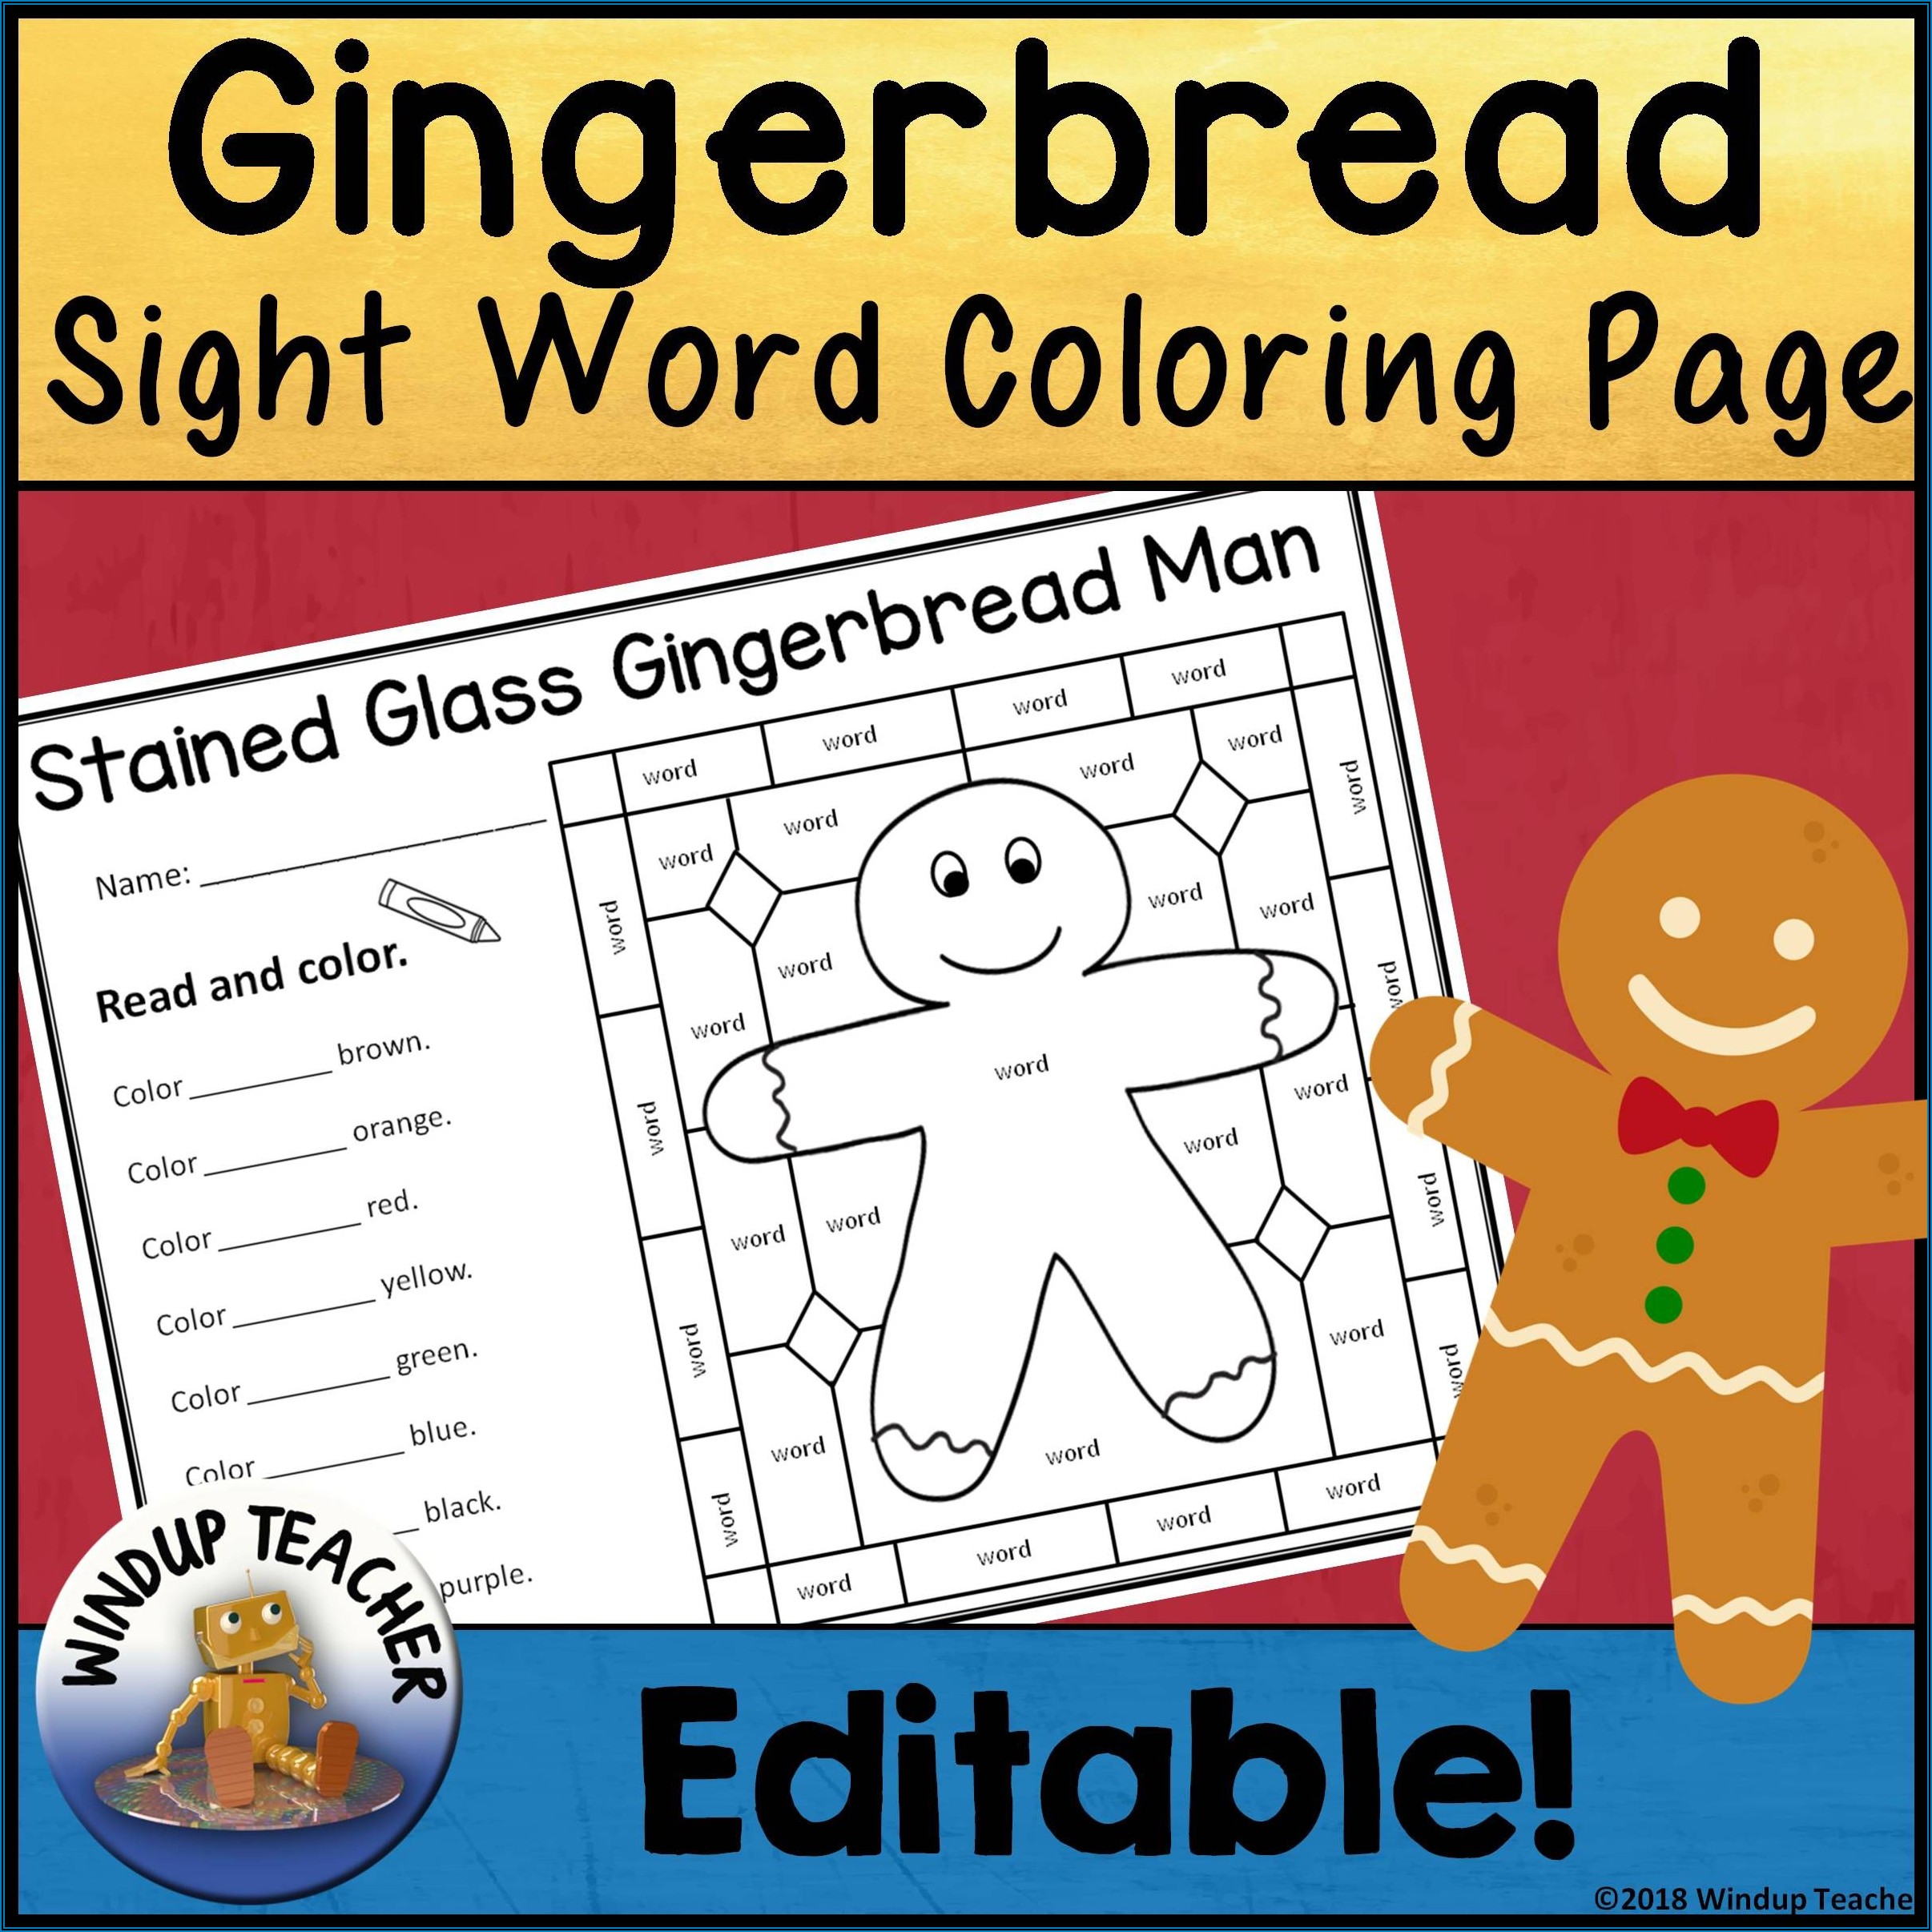 Can Sight Word Sheet